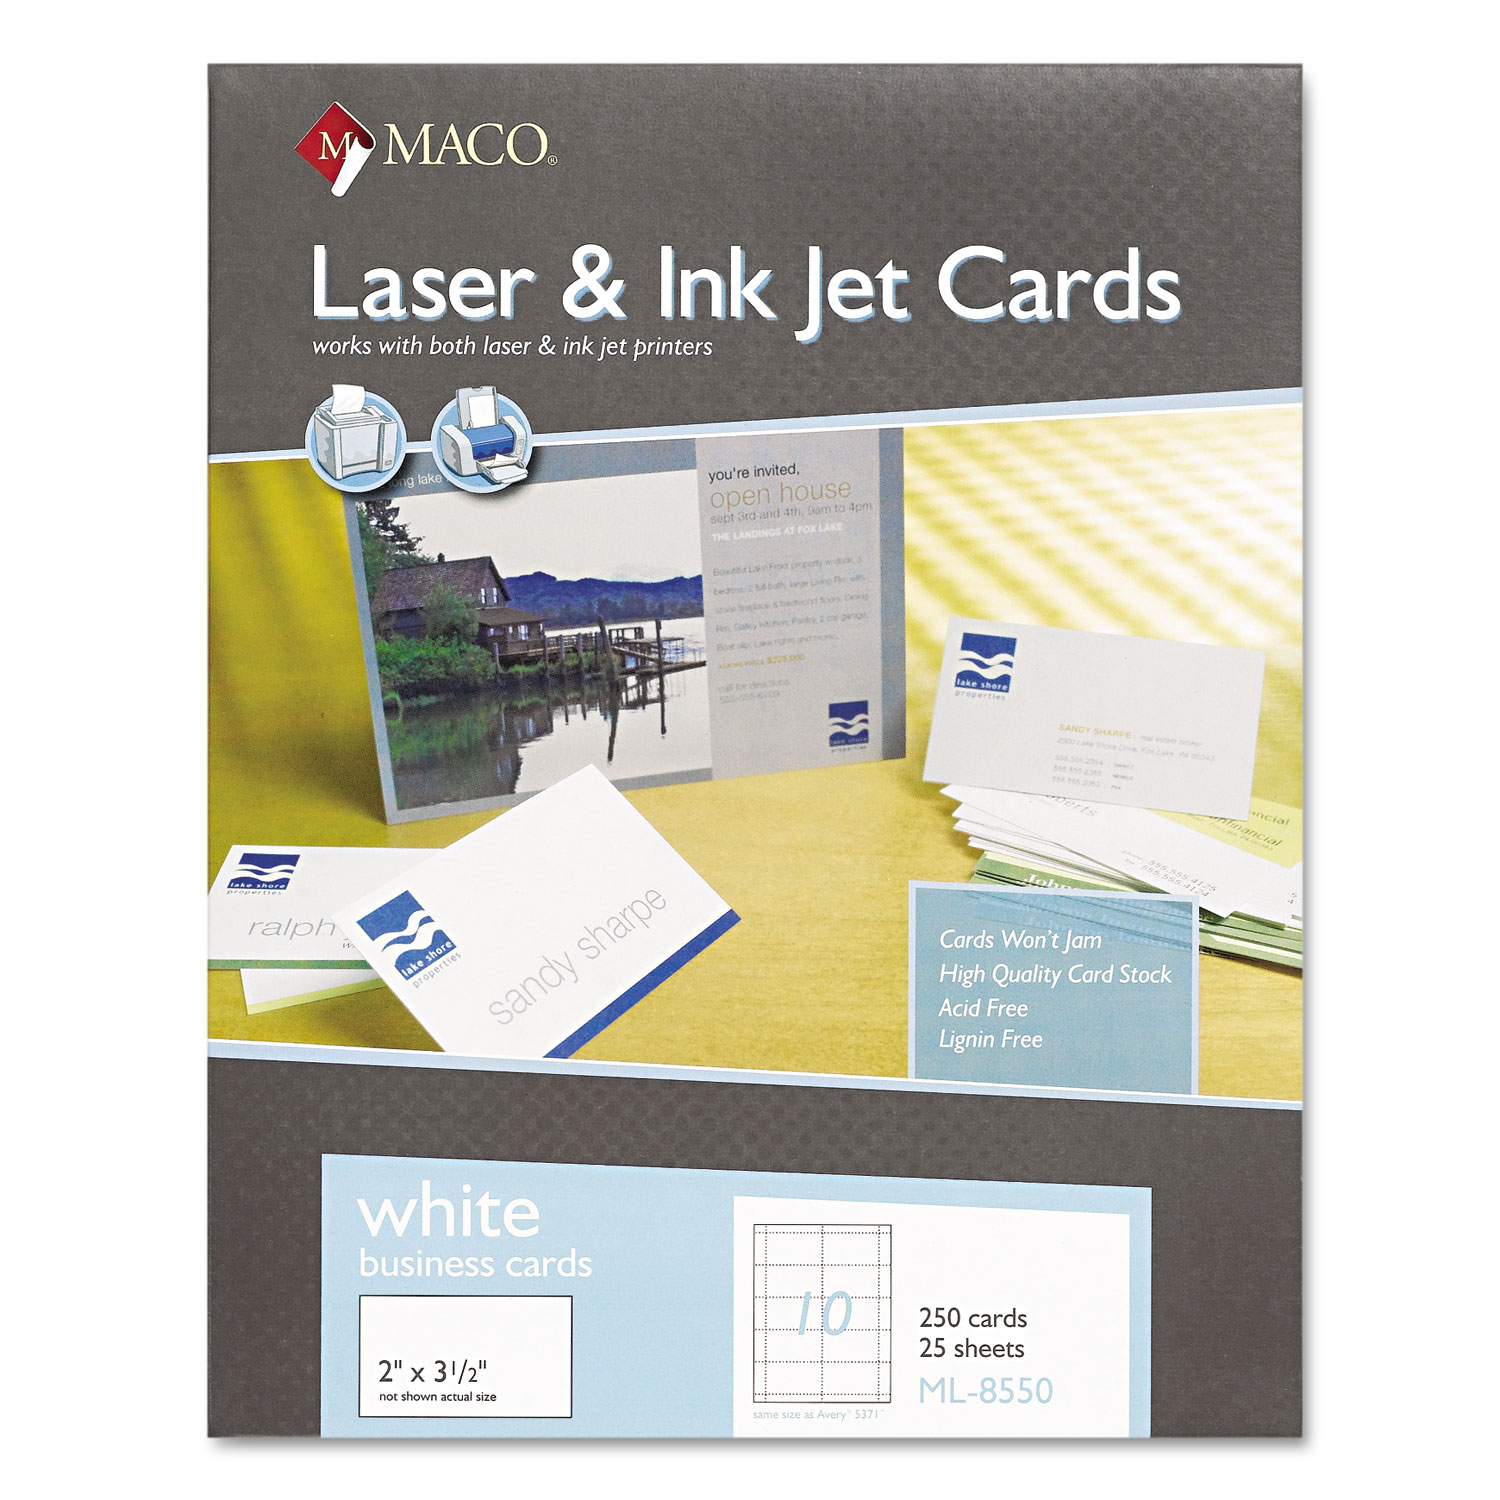 Microperforated Laser/Ink Jet Business Cards, 2 x 3 1/2, White, 250/Box